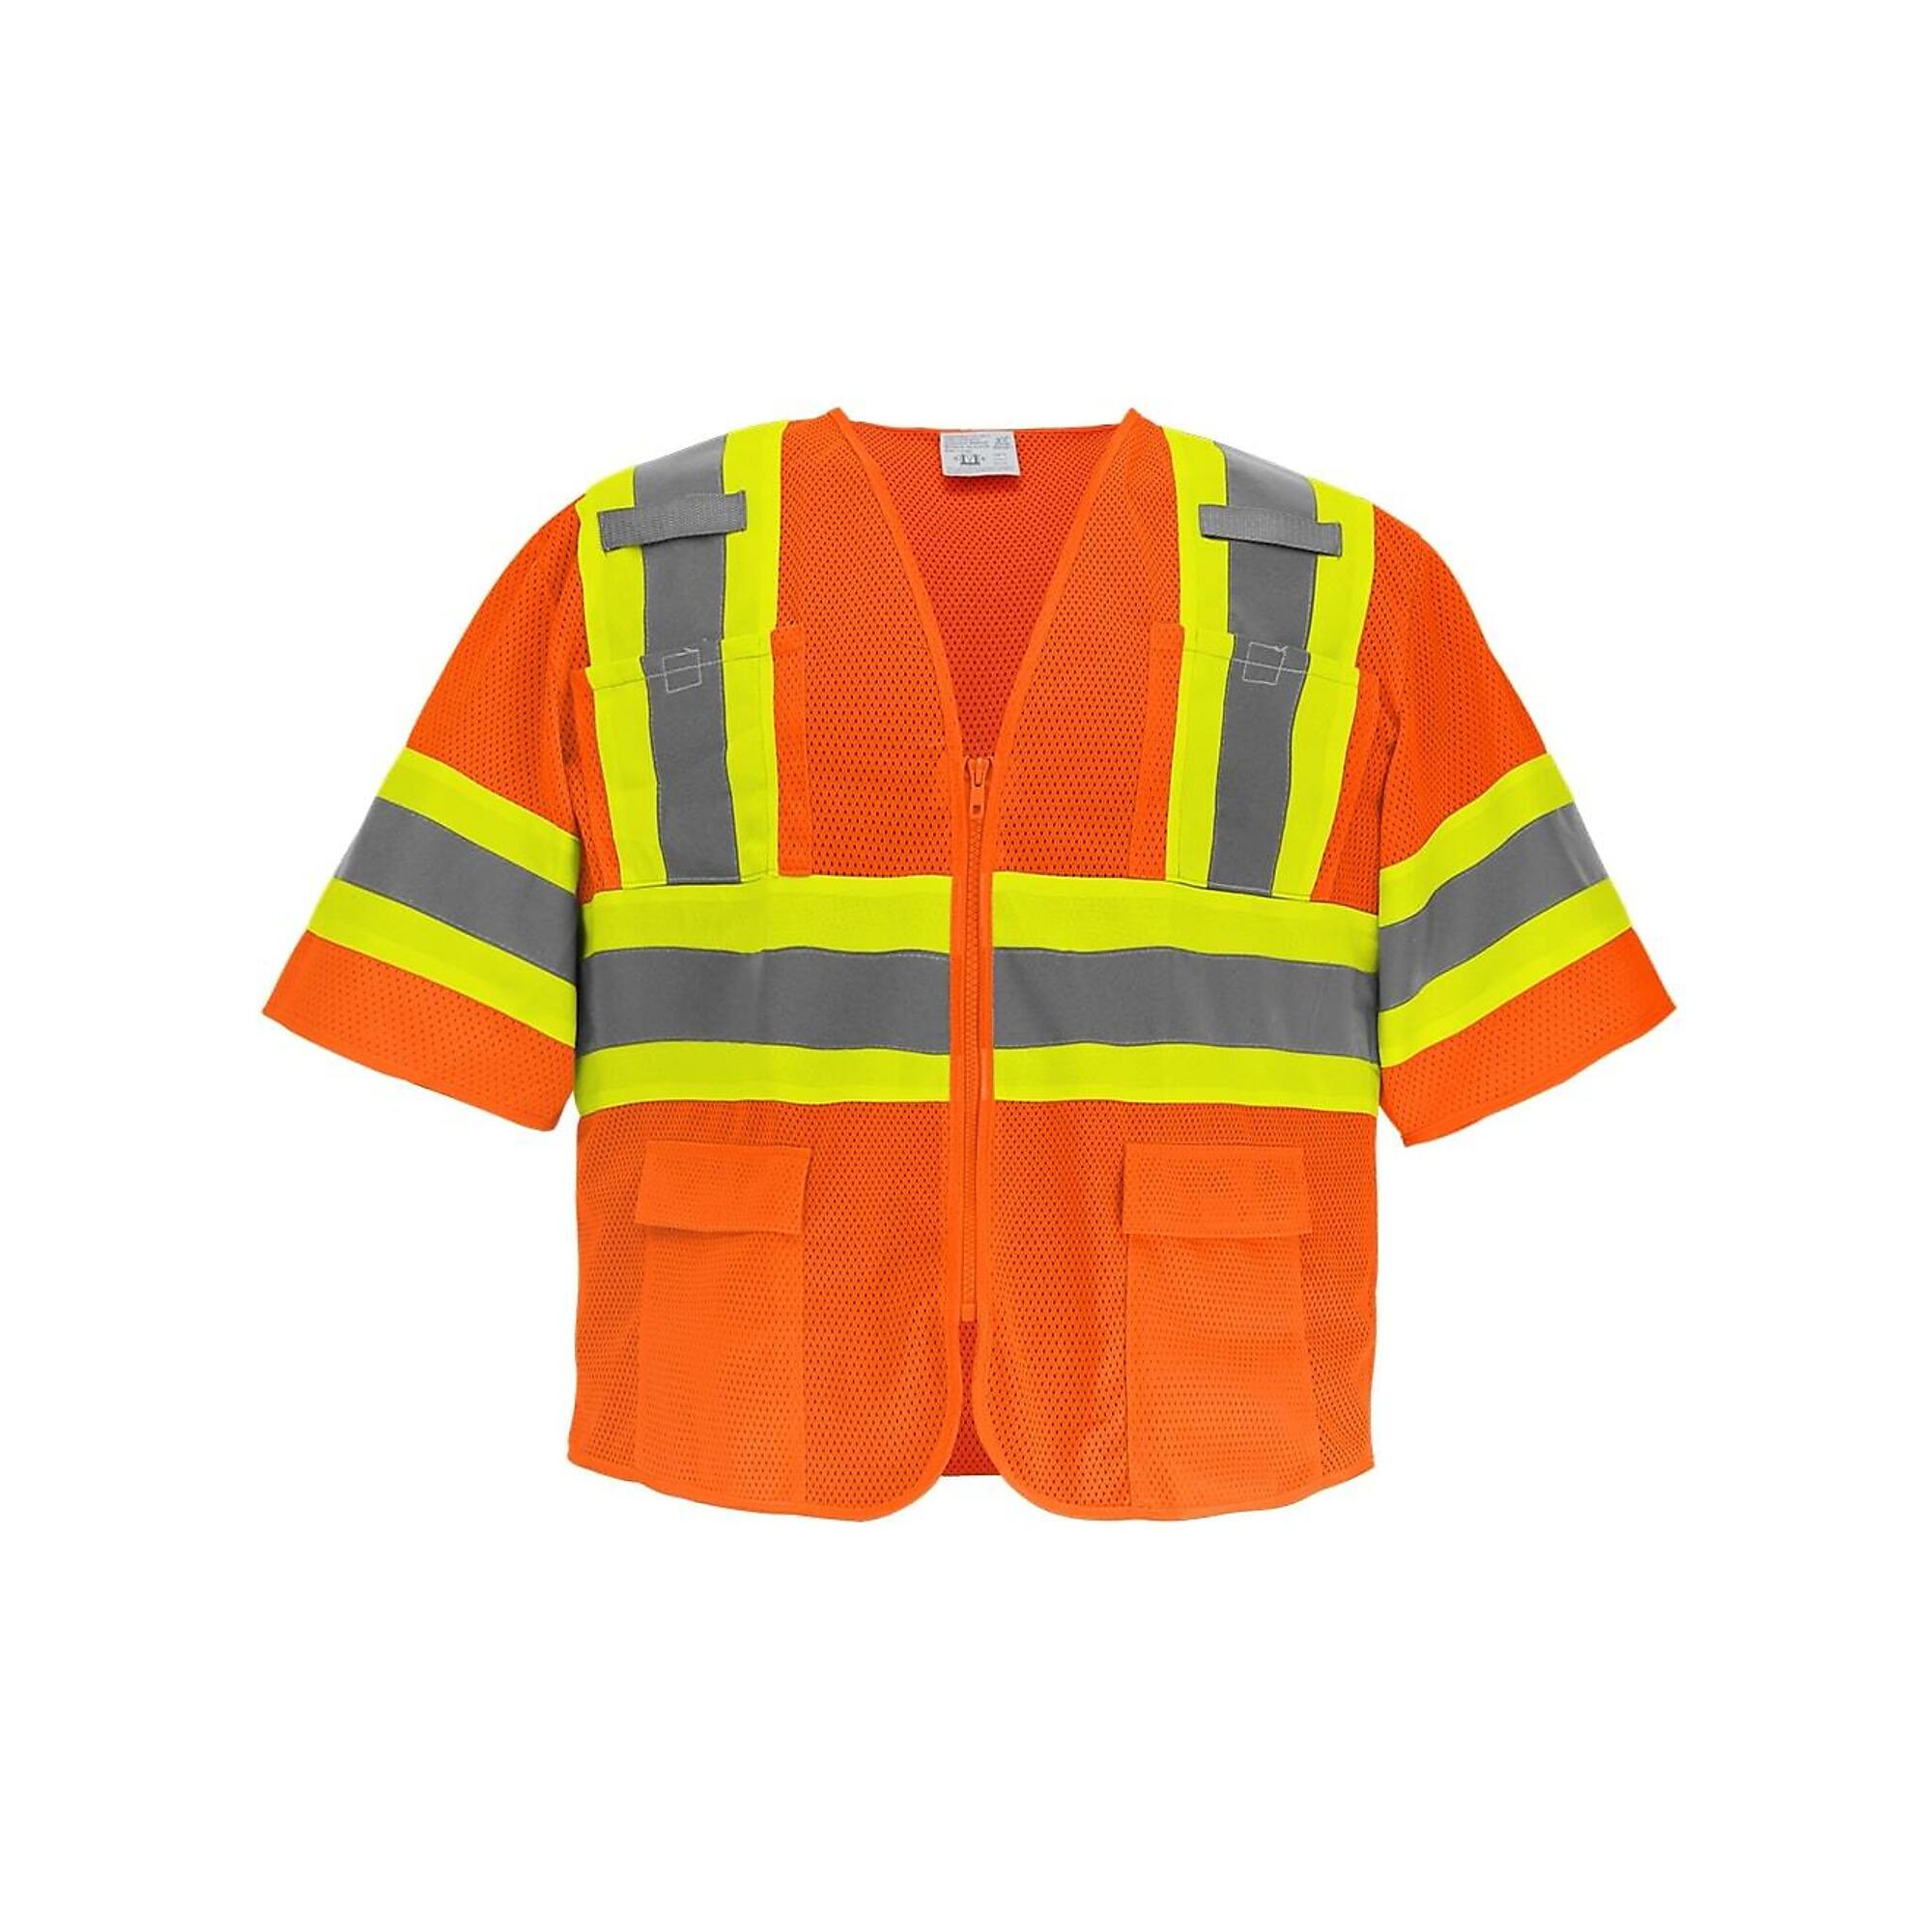 FrogWear, HV Orange, Class 3 6 Pockets, With Sleeves Mesh Vest, Size XL, Color High-Visibility Orange, Model GLO-0145-XL